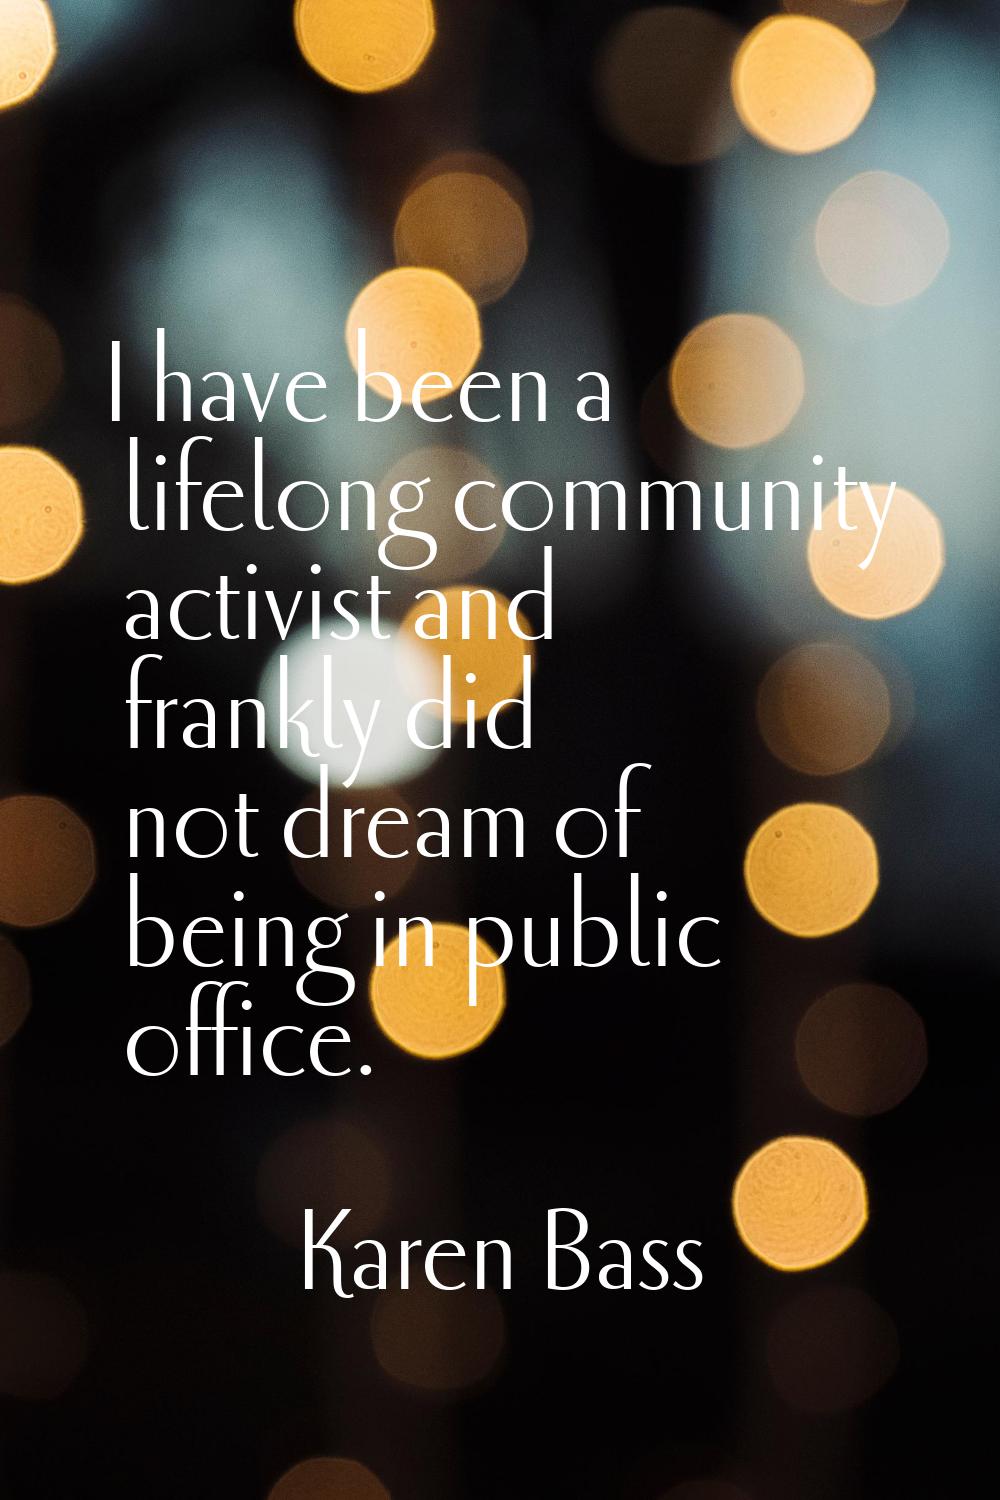 I have been a lifelong community activist and frankly did not dream of being in public office.